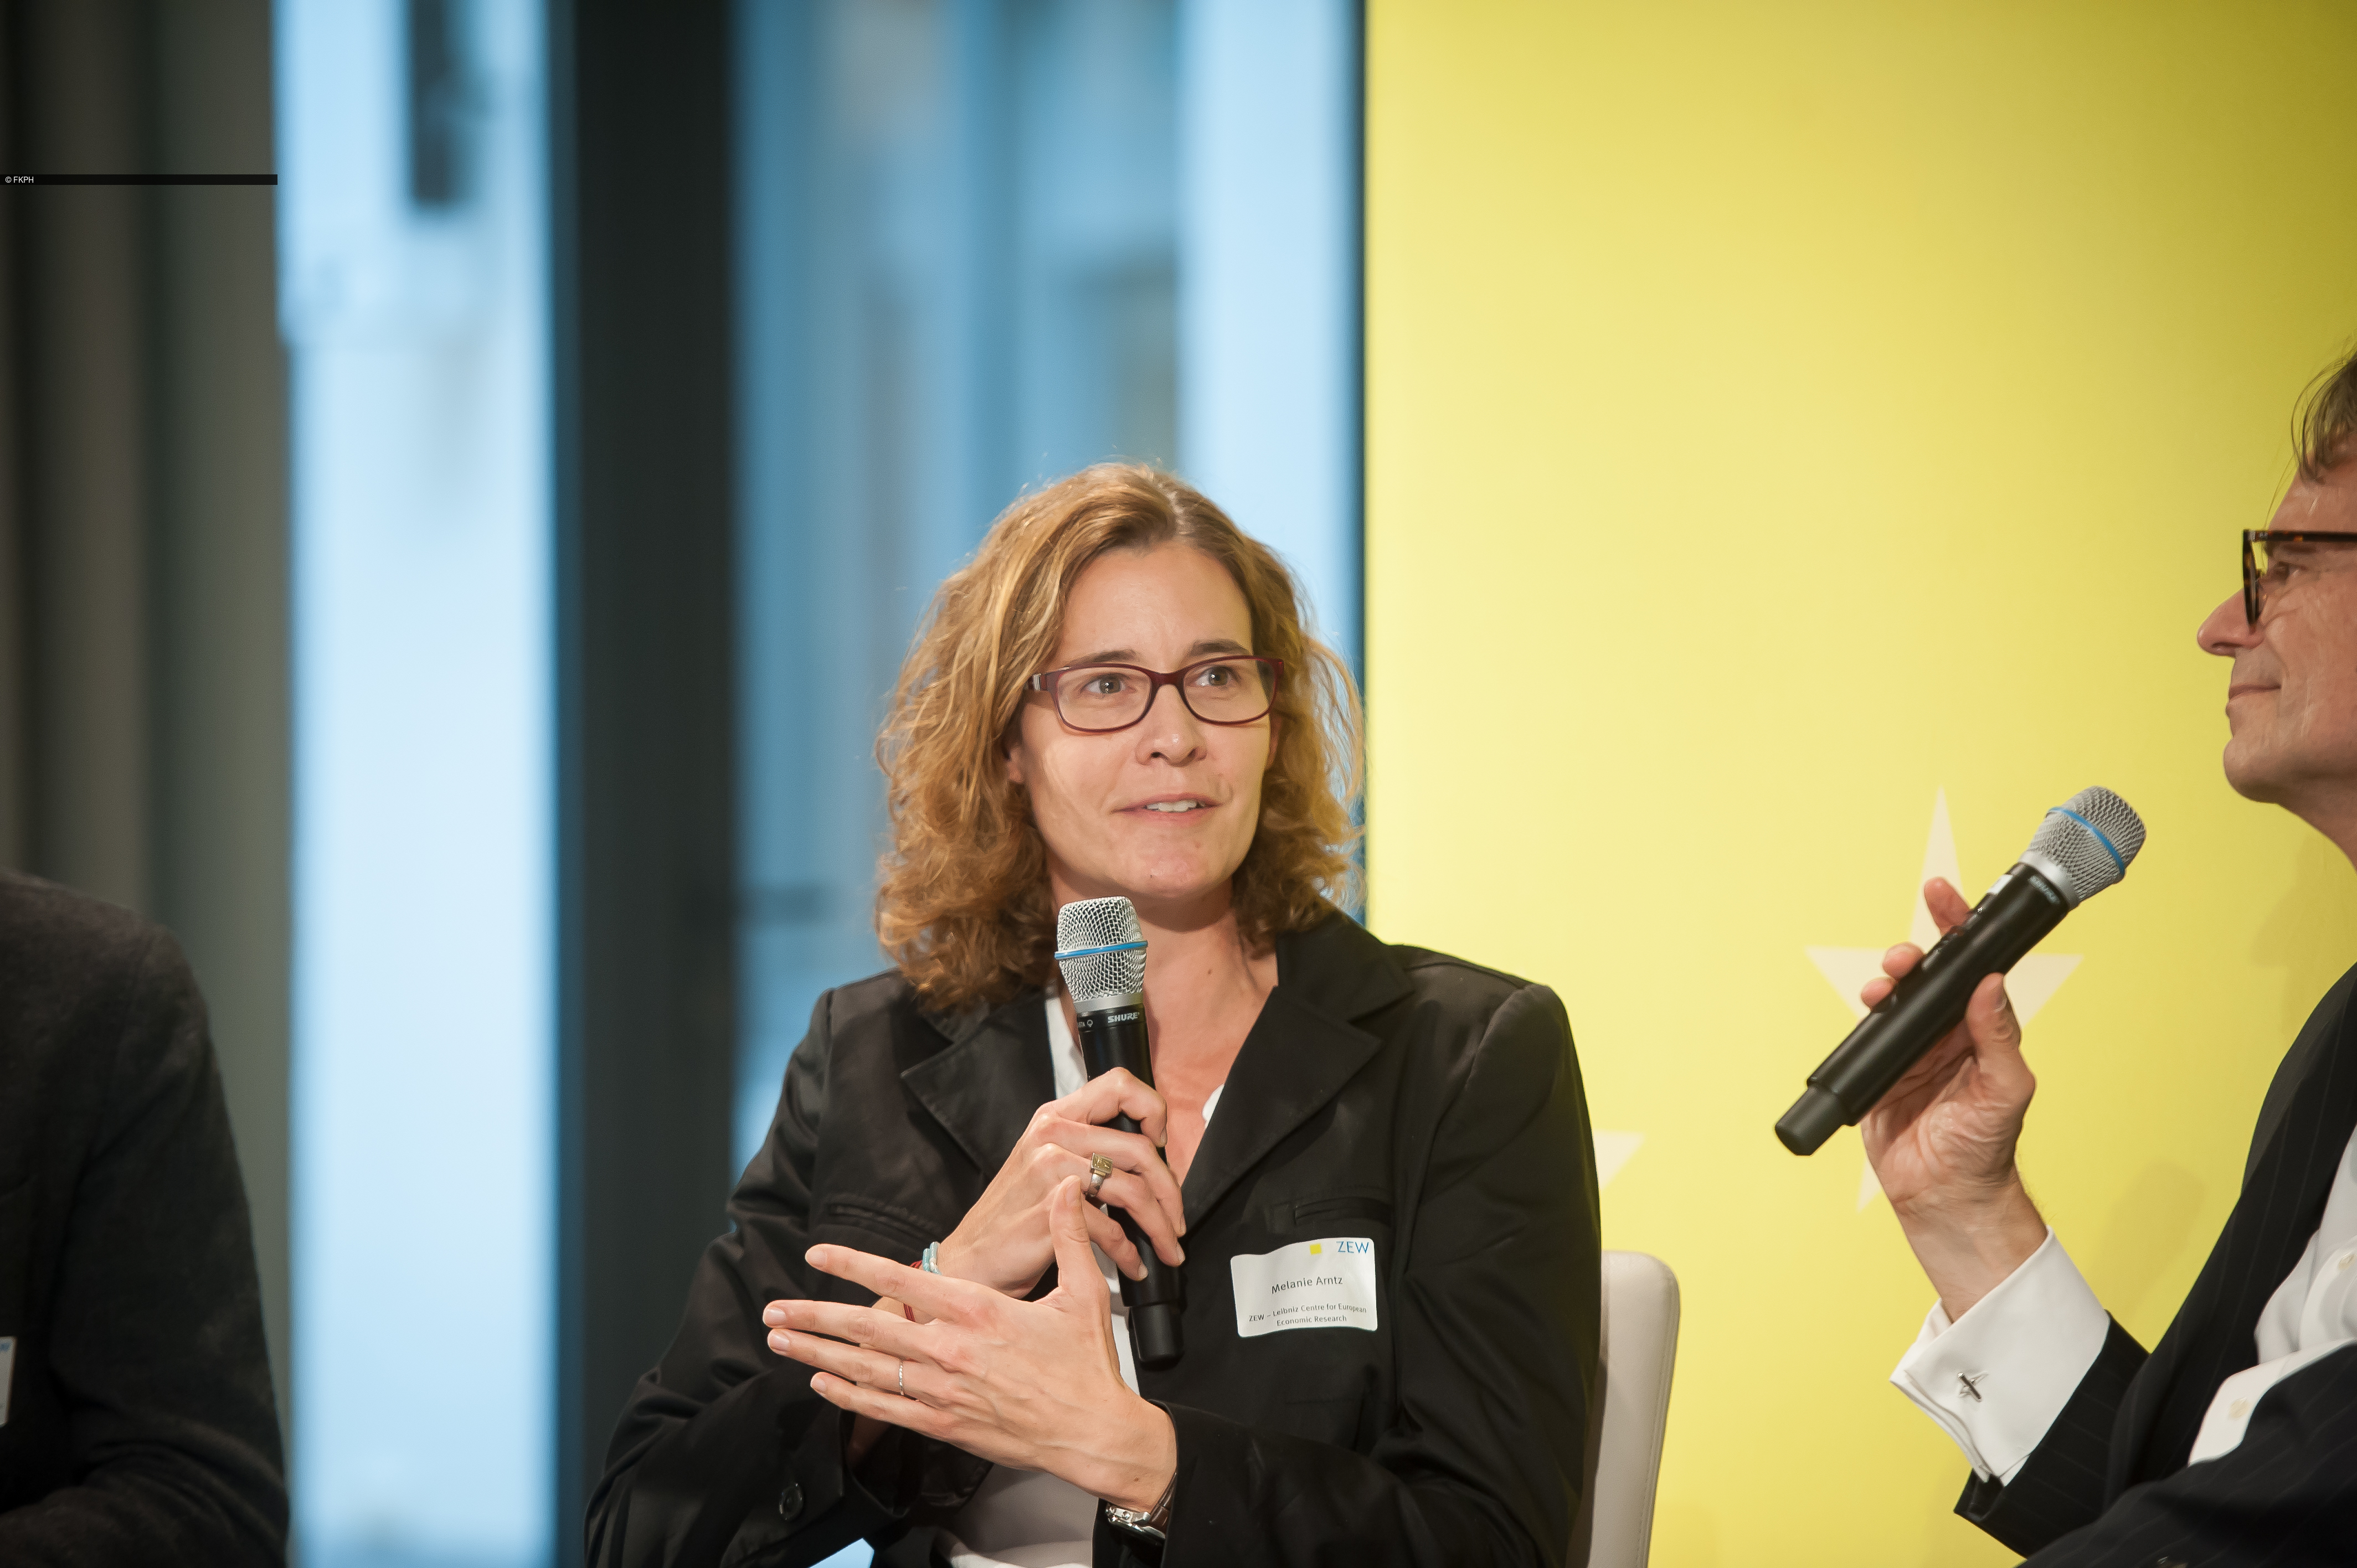 Melanie Arntz discusses digitalization at the workplace during ZEW Lunch Debate